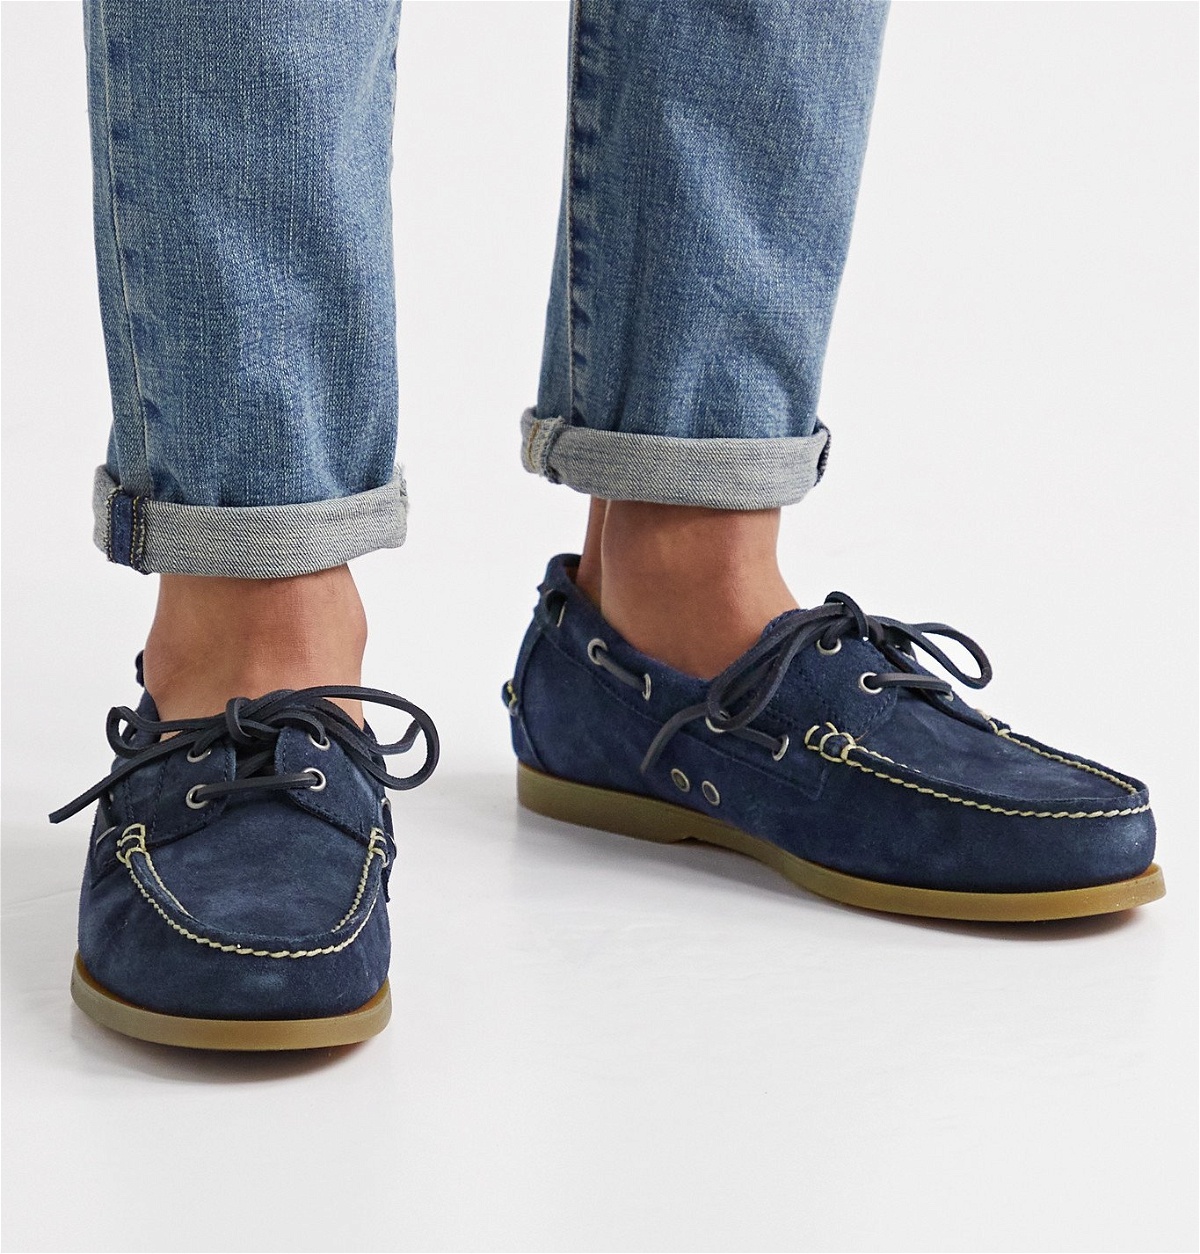 New Mens Polo Country Ralph Lauren Ranger Deck Suede Leather Boat Shoes  Size 8.5 | eBay